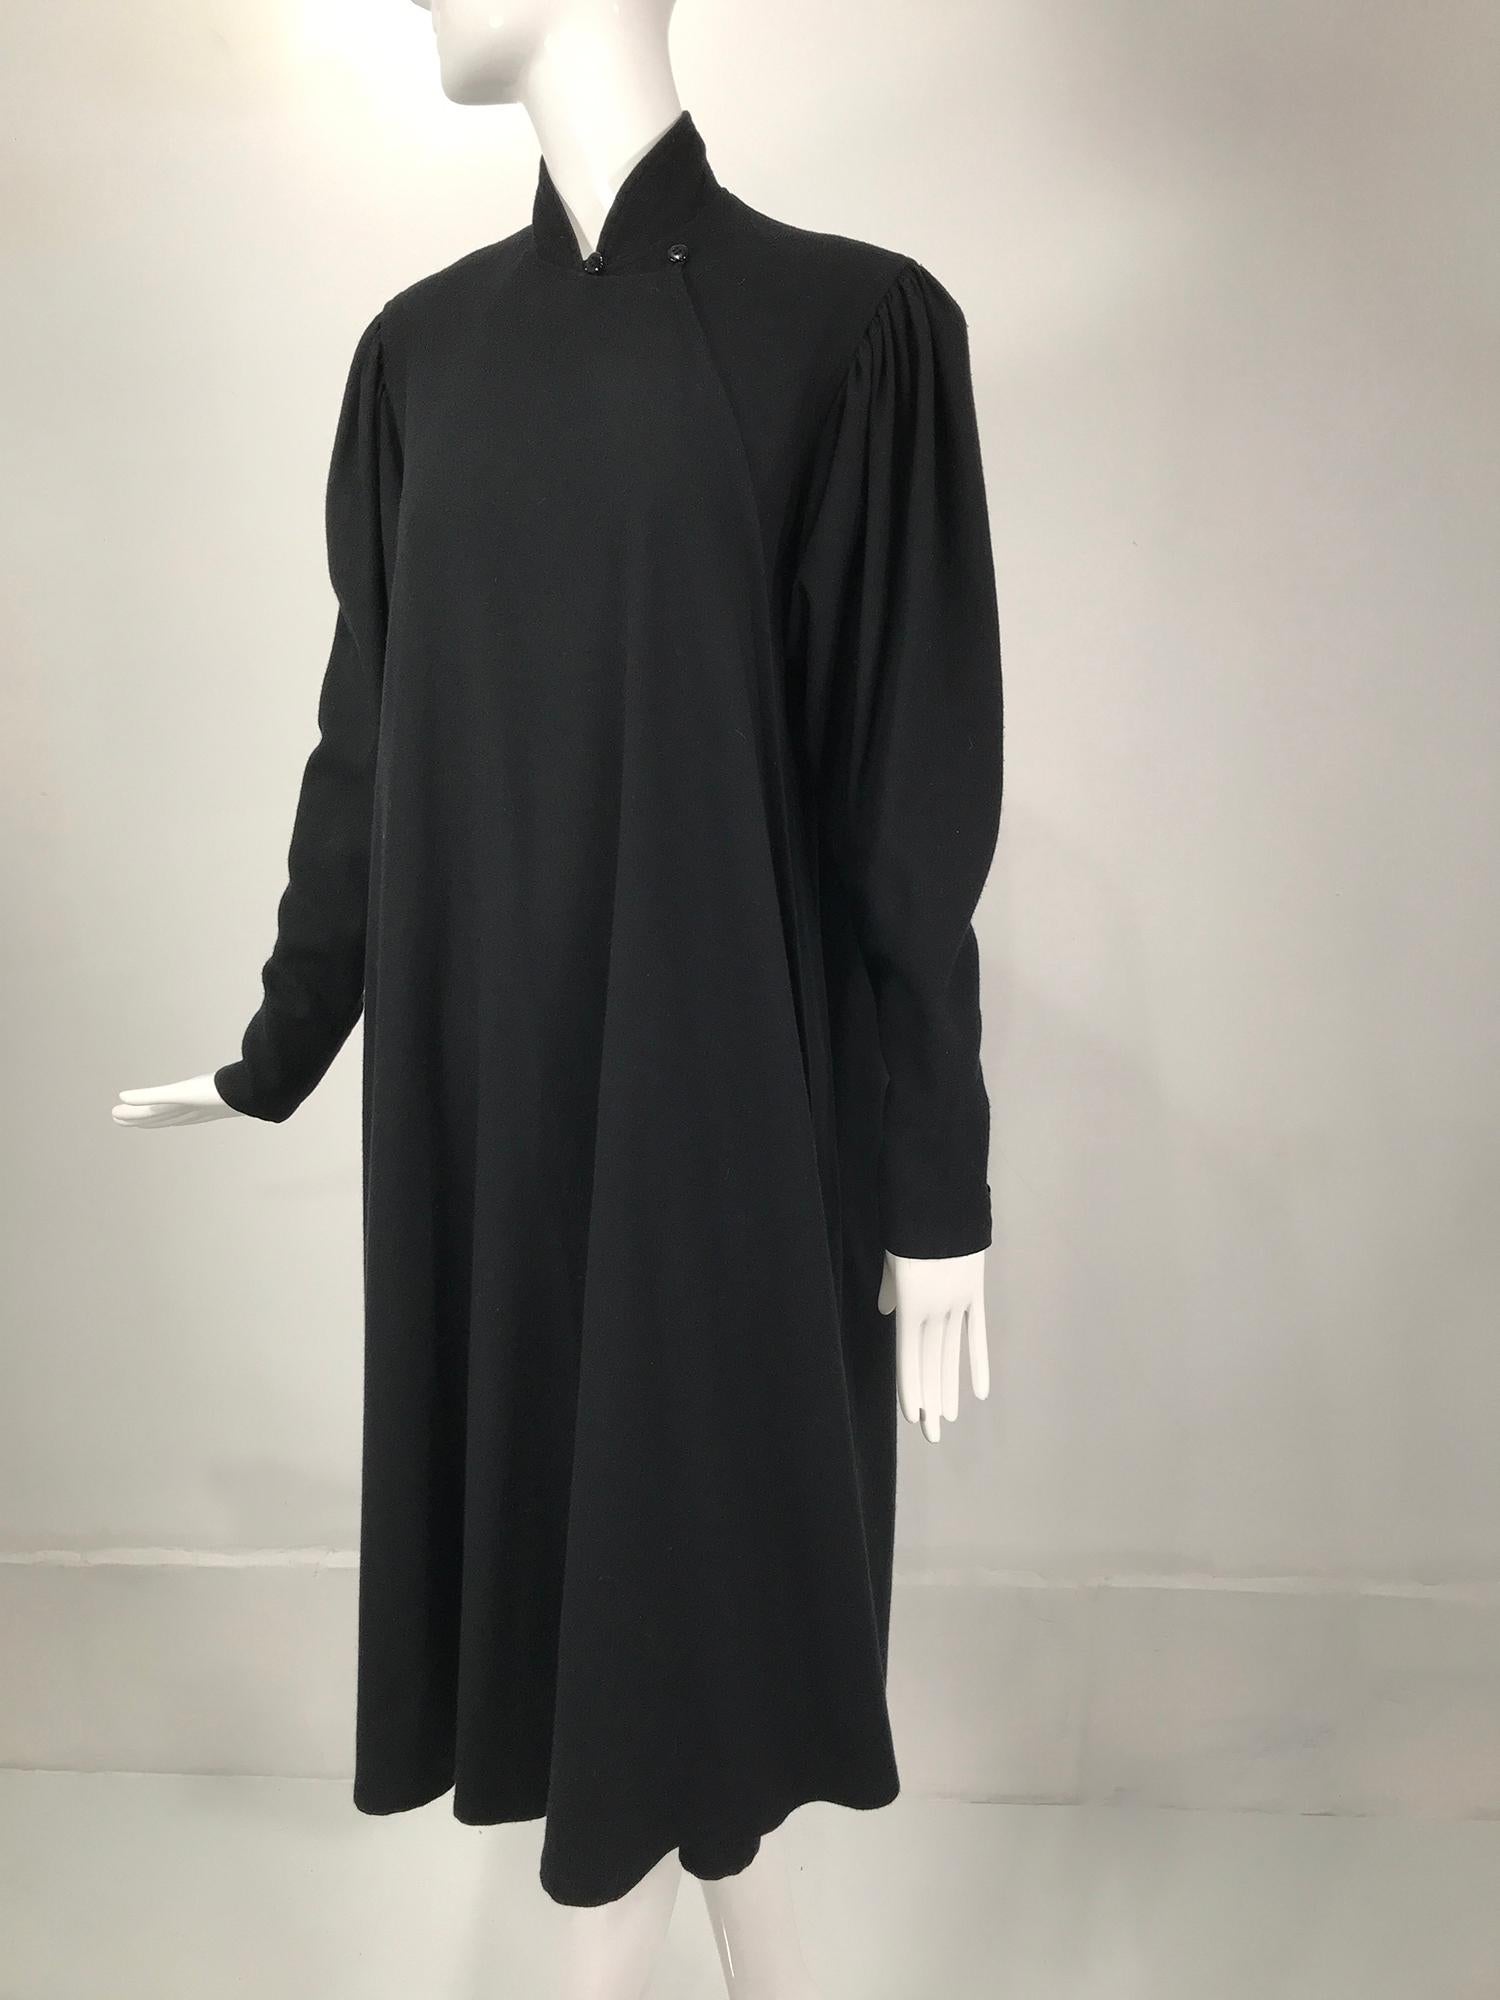 Kenzo double face black wool cheongsam style coat from the 1980s. Unusual coat with a high band collar that wraps in the front and closes with double loop and buttons ending there with the similarly to the cheongsam. The coat wraps and is open to